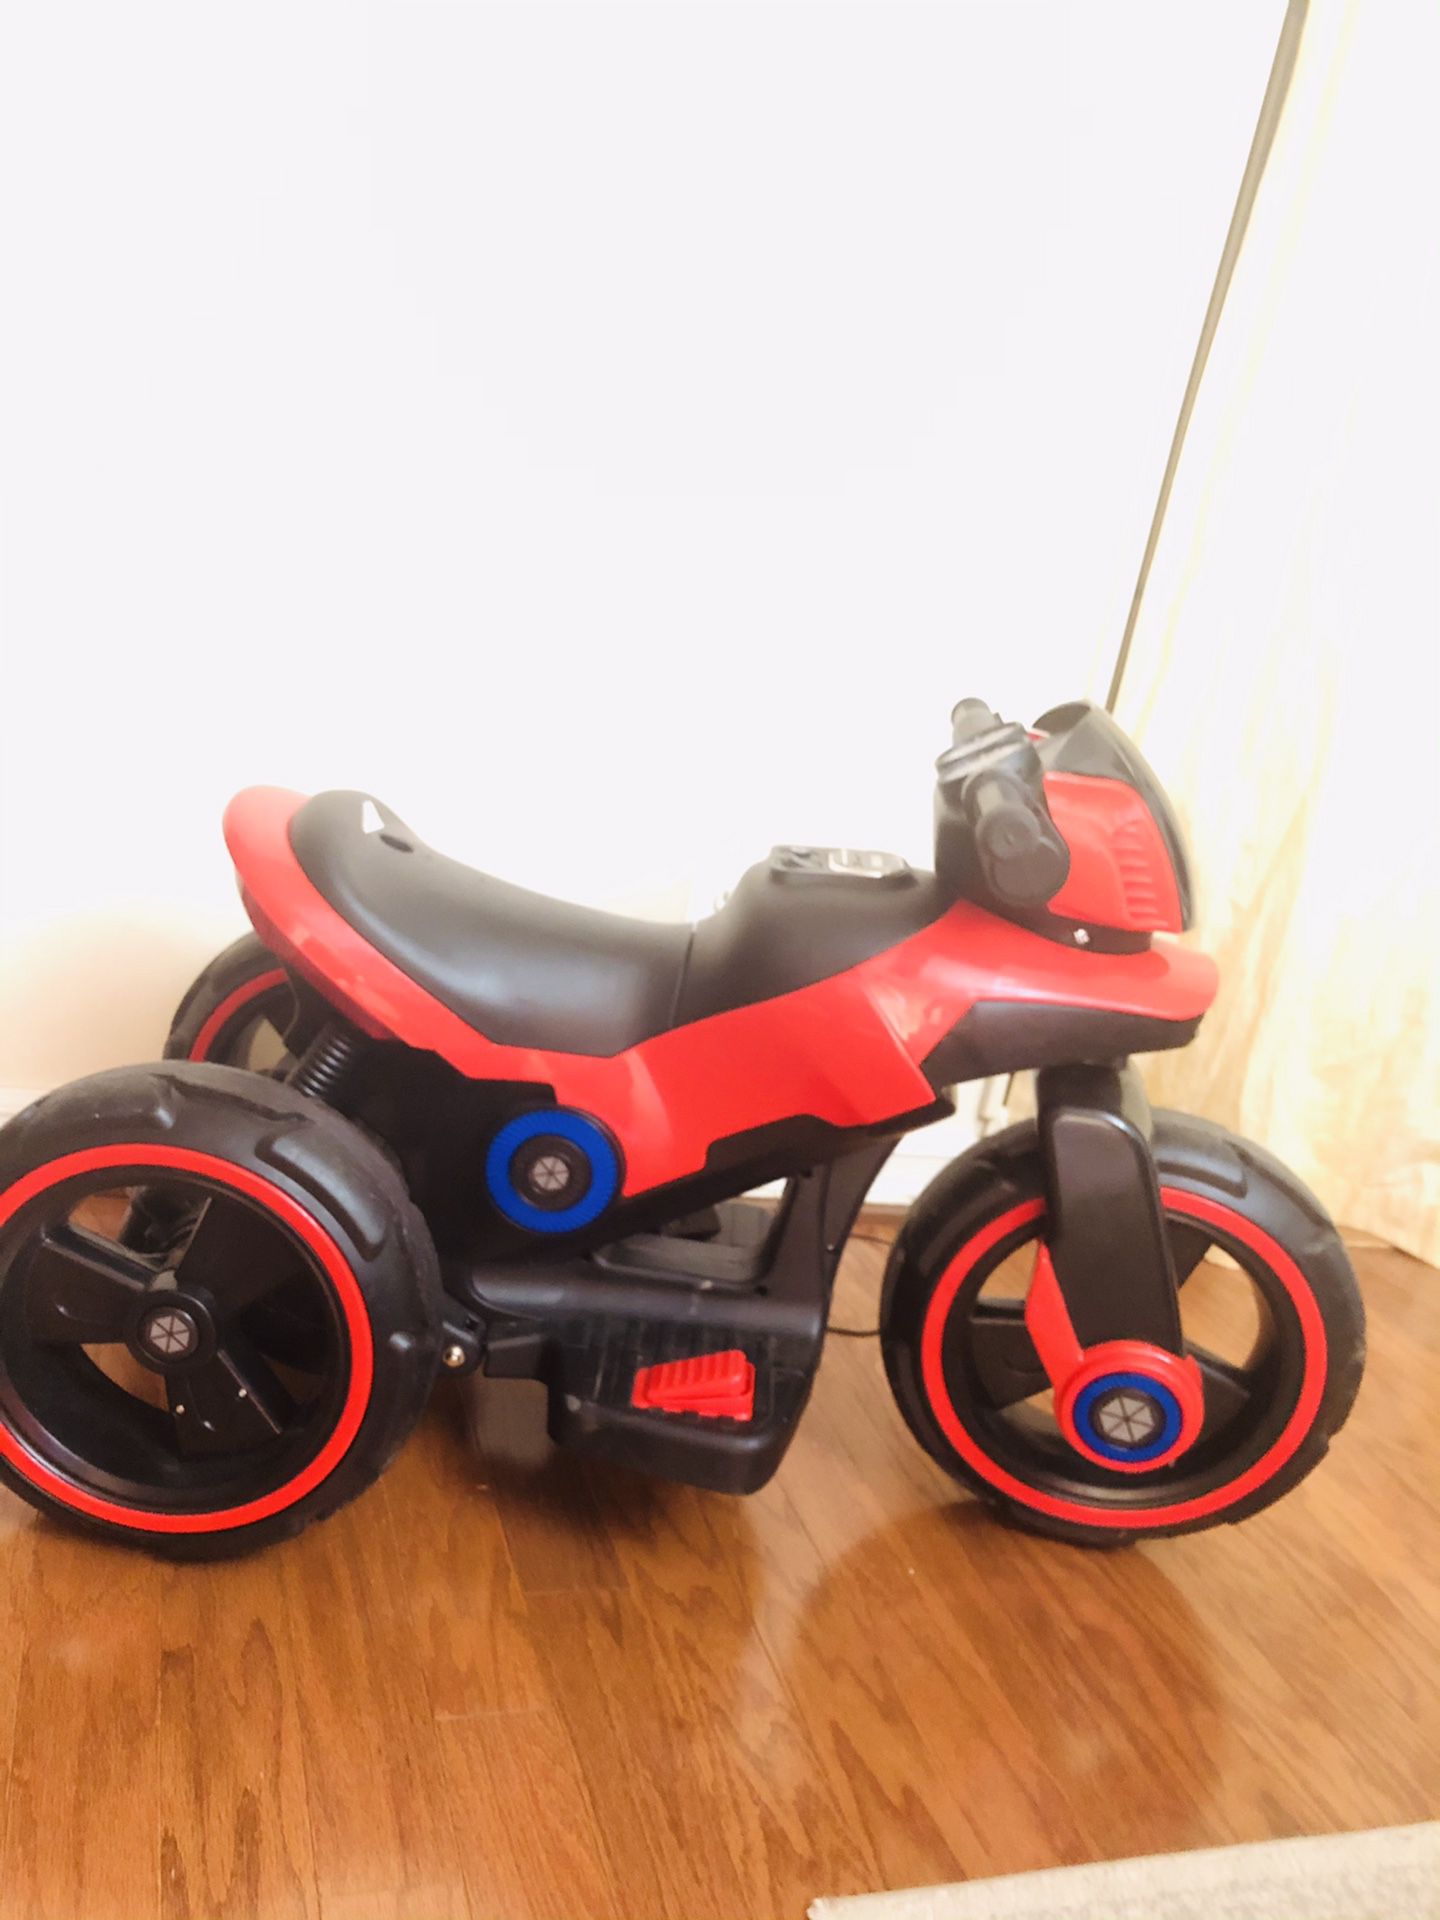 Tobbi Kids Ride On Motorcycle 6V Bicycle 3 Wheels Electric Battery Powered Toy w/ Horn, MP3, TF Card Slot, USB Interface, and Story Function